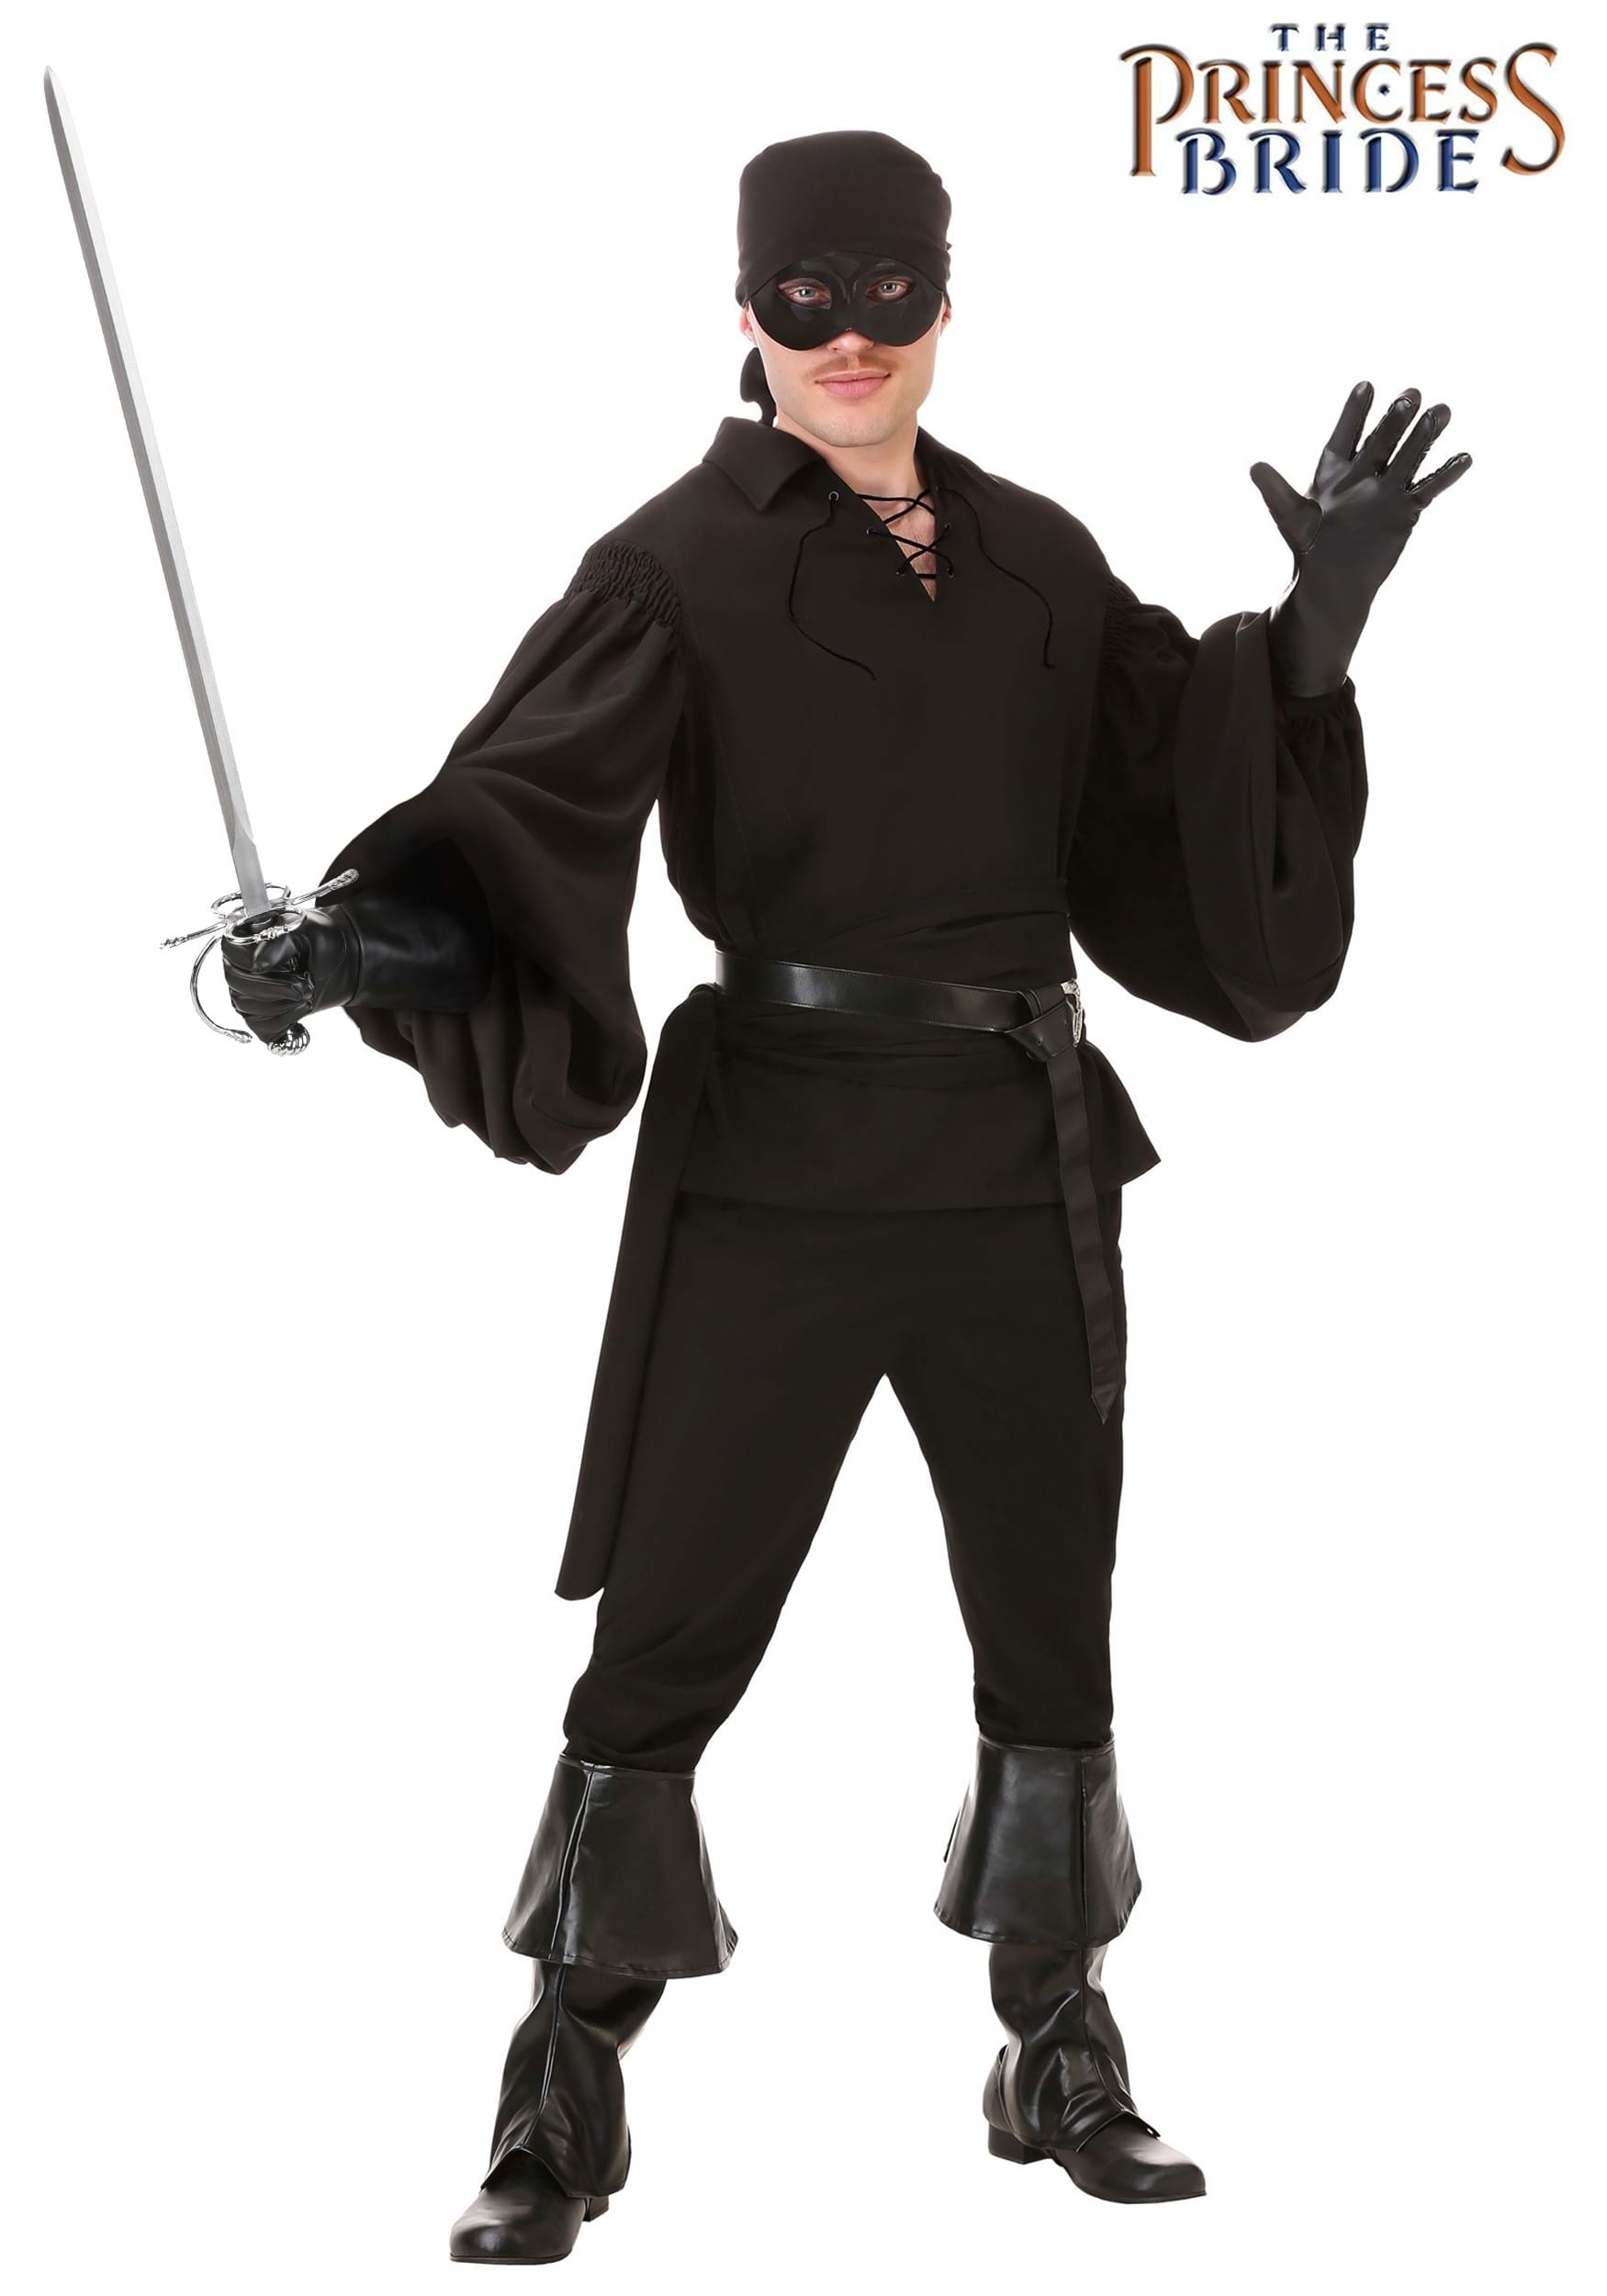 Authentic Westley The Princess Bride Adult Halloween Costume